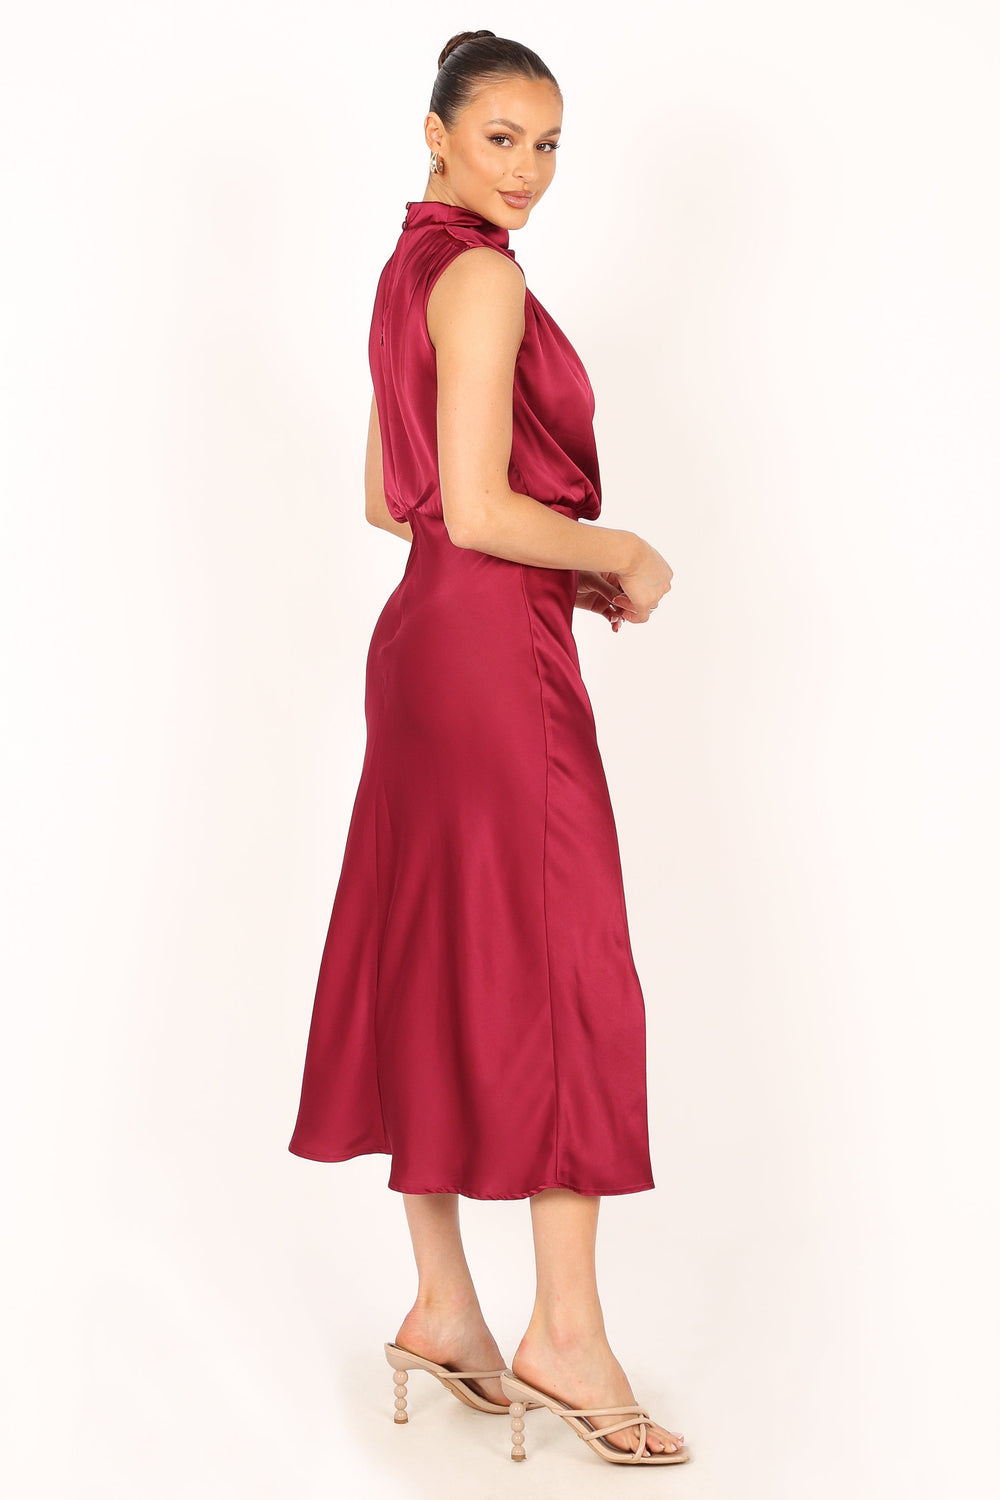 Petal and Pup USA DRESSES Anabelle Halter Neck Maxi Dress - Berry